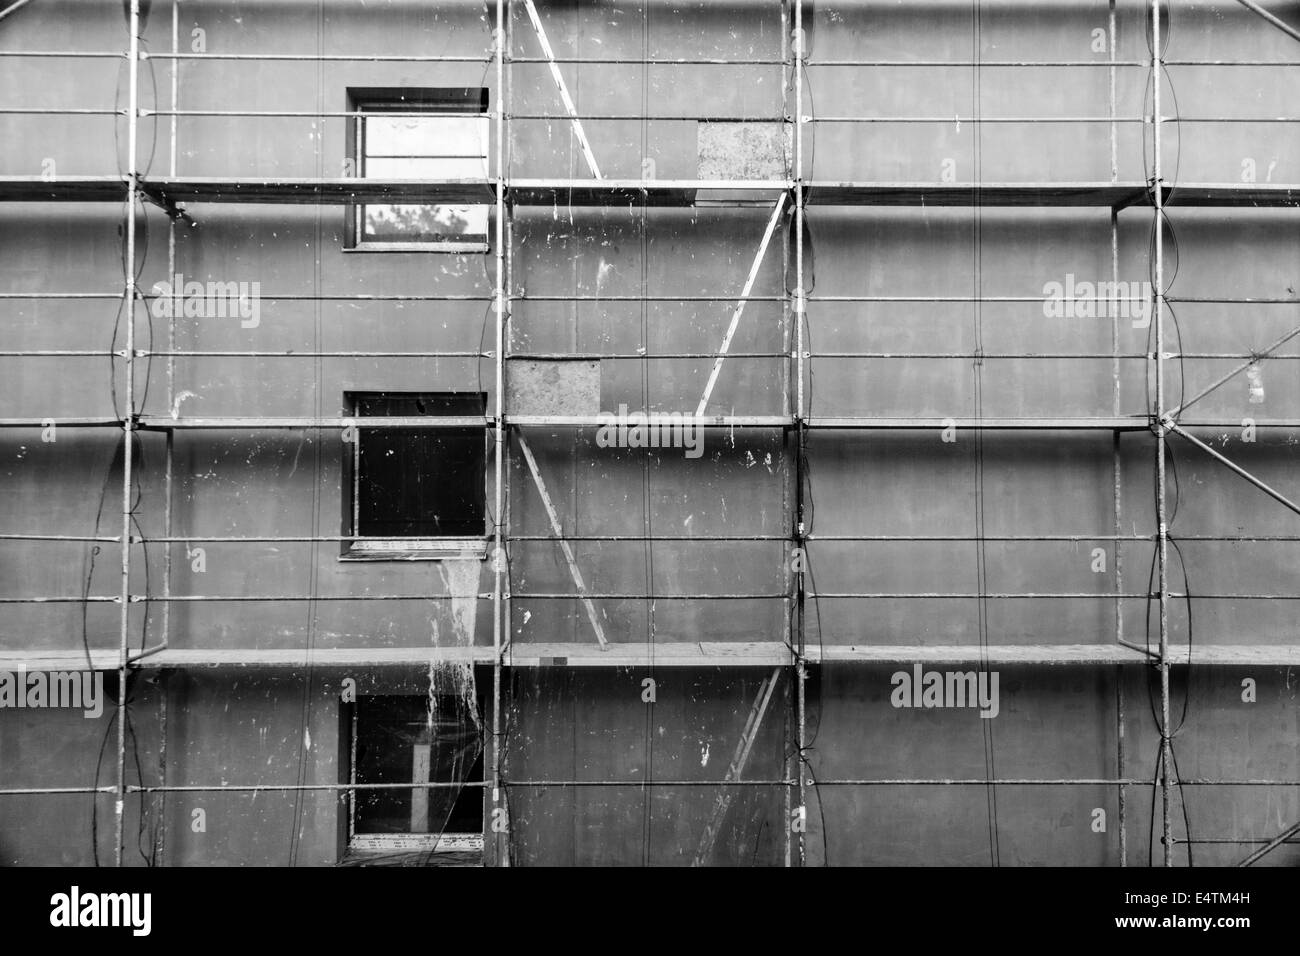 Scaffold on a block of flats in Czech Republic. 3 windows, 4 ladders & access hatches can be seen. All covered by a safety net Stock Photo